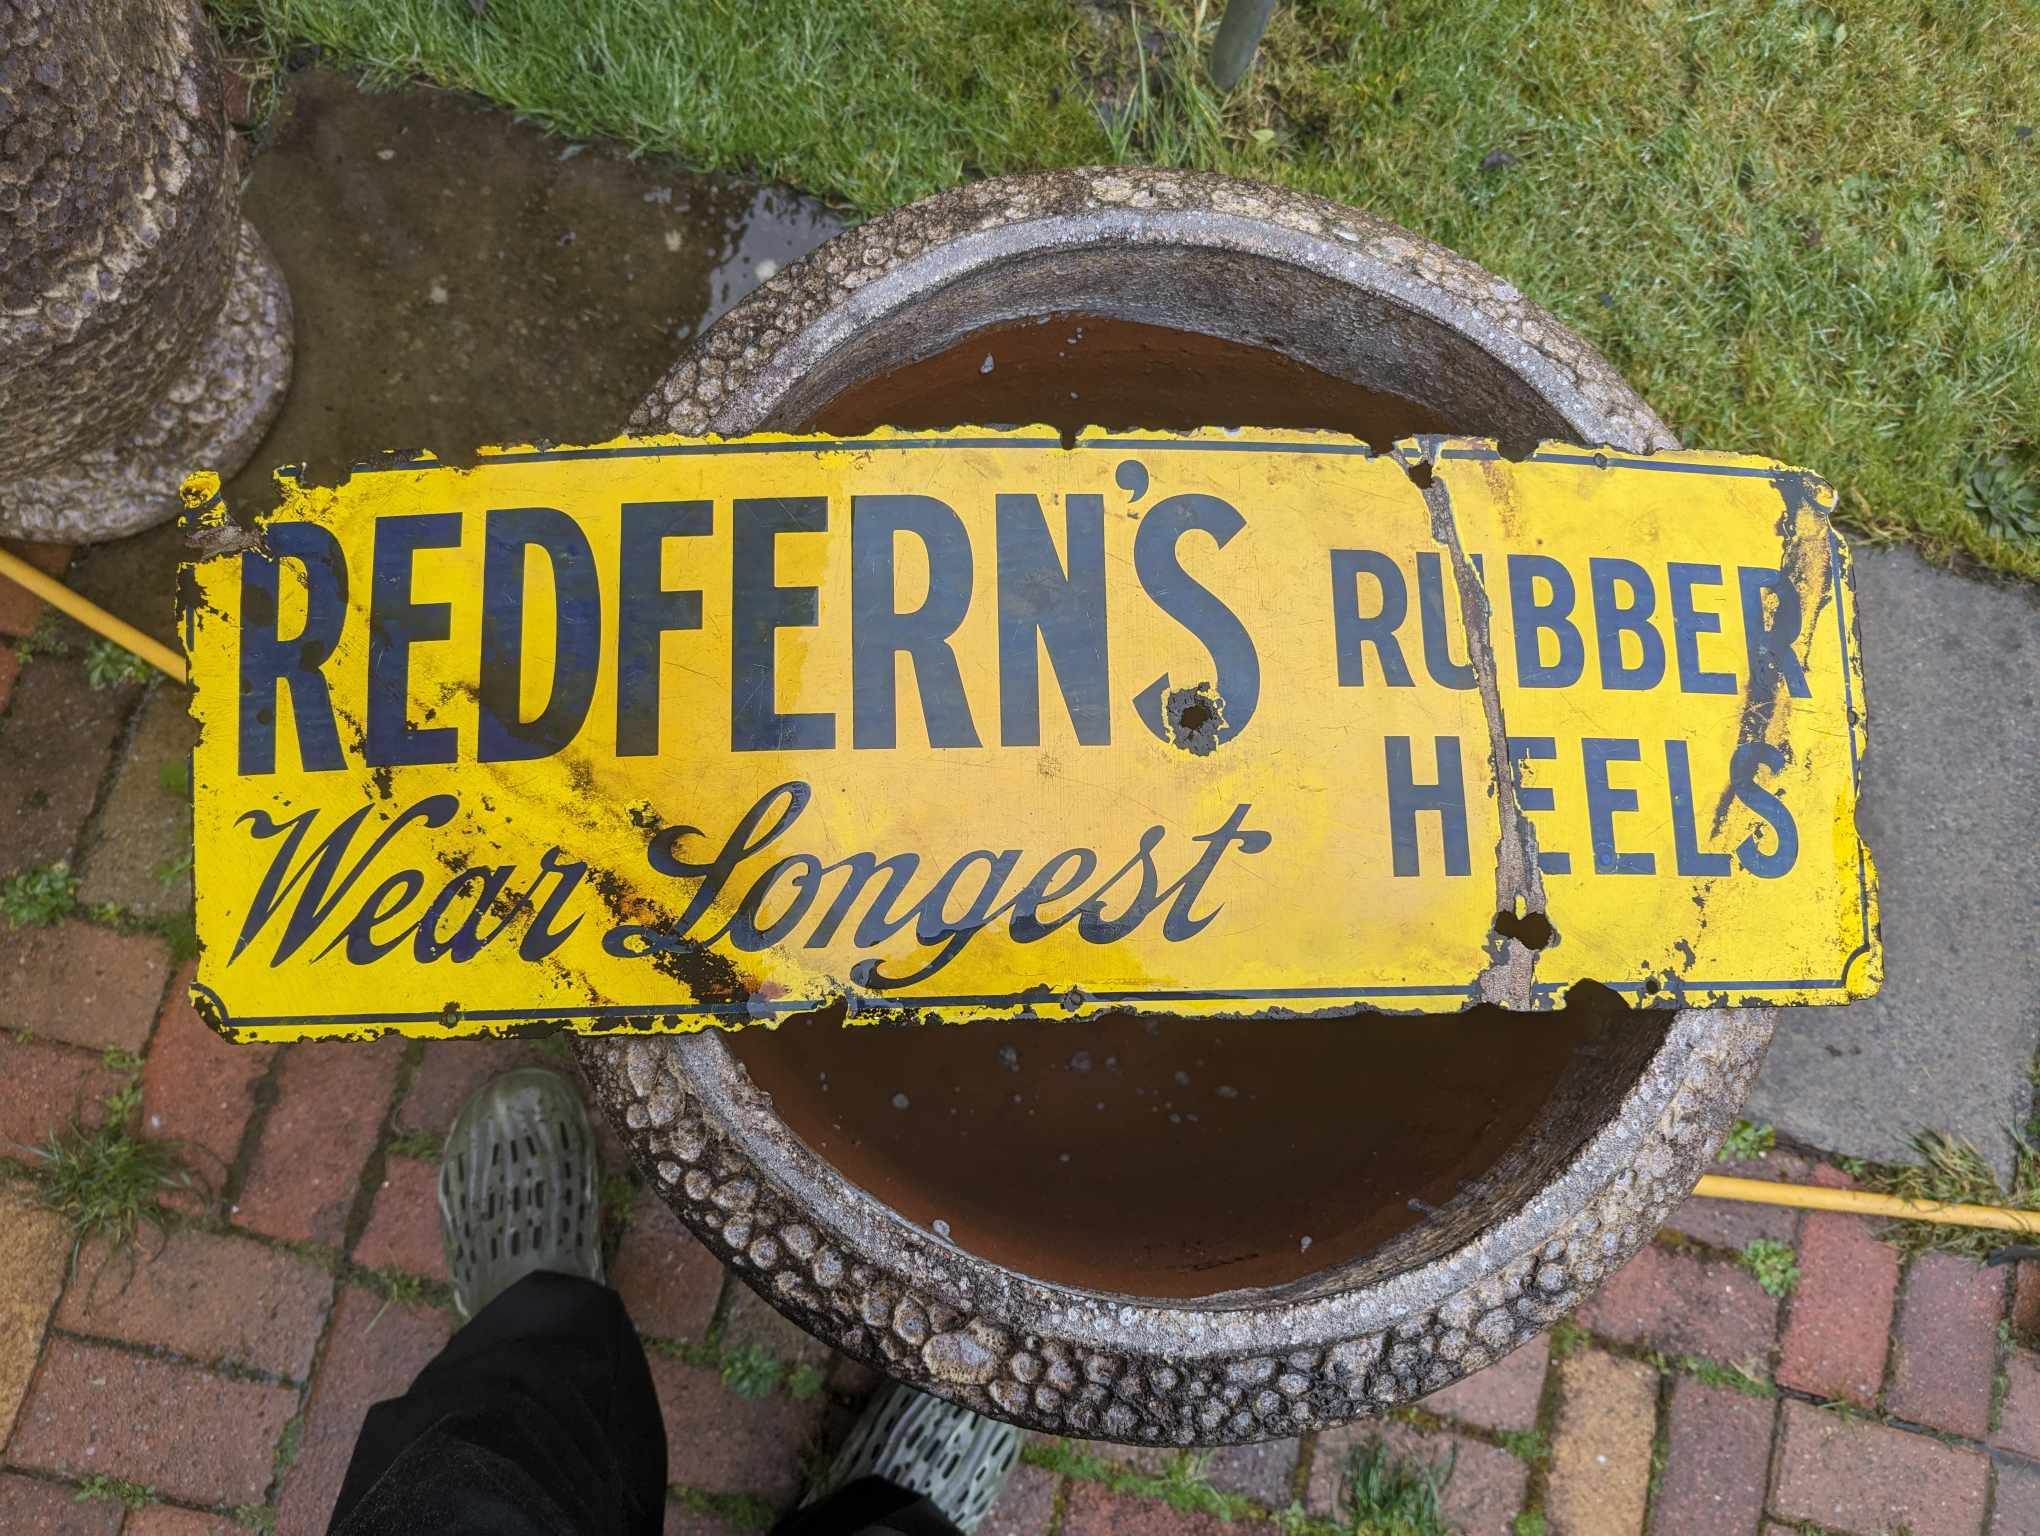  A sign from the 1900's was among the 400kg haul.